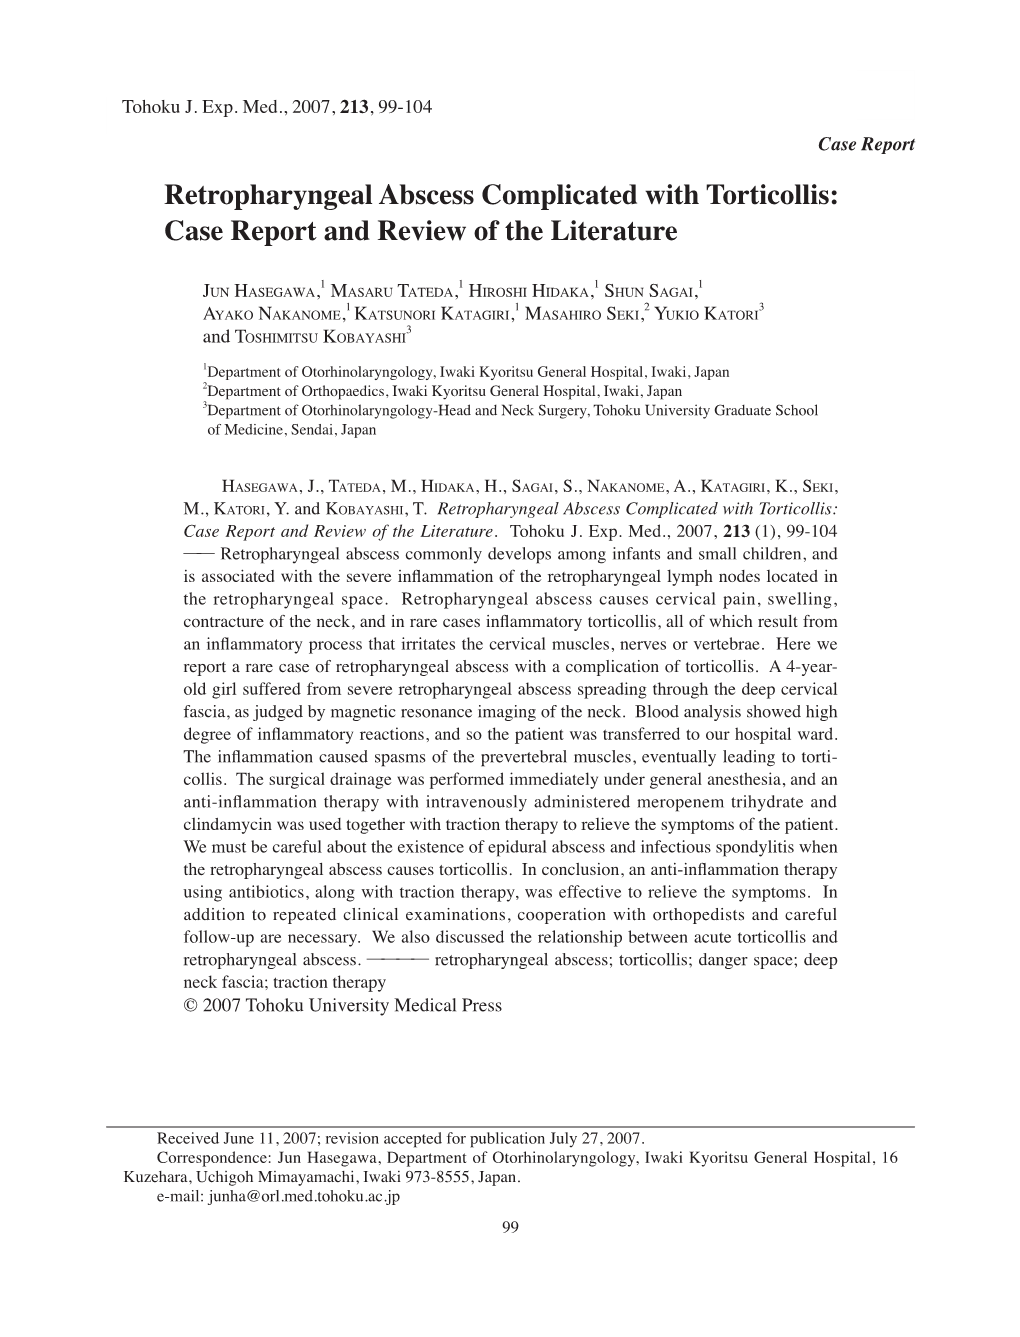 Retropharyngeal Abscess Complicated with Torticollis: Case Report and Review of the Literature